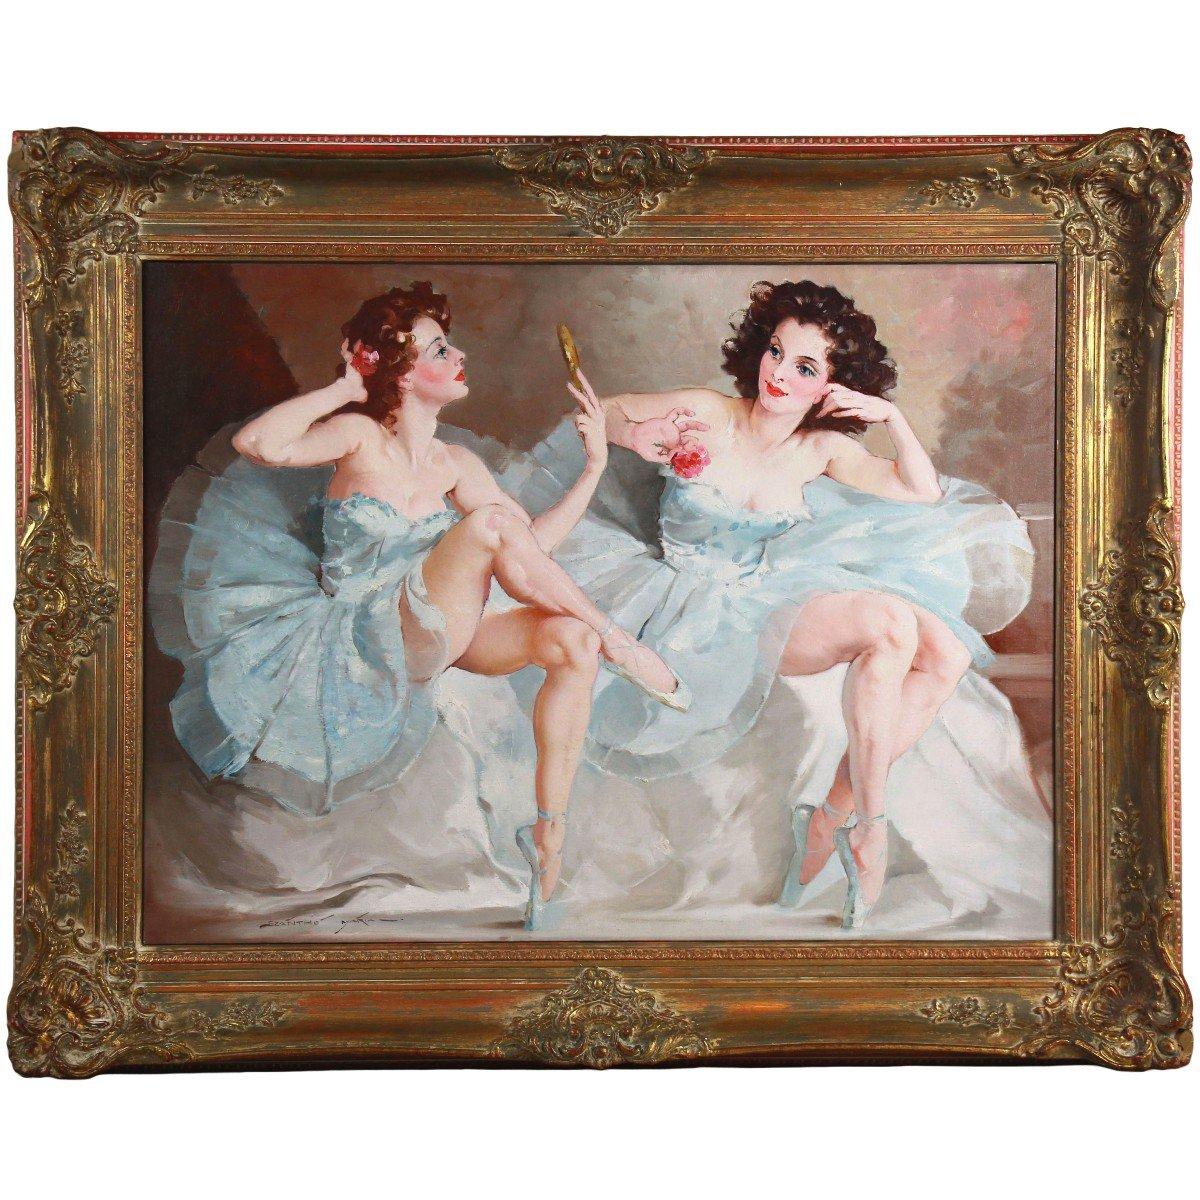 "Two Ballerinas Oil On Canvas By Maria Szantho Frame"
Nice and large painting "two ballerinas", painted by the female artist Maria Szantho (1897 - 1998) Hungarian school.
Maria Szantho was born on July 31, 1897 in Szeged, in southern Hungary. She